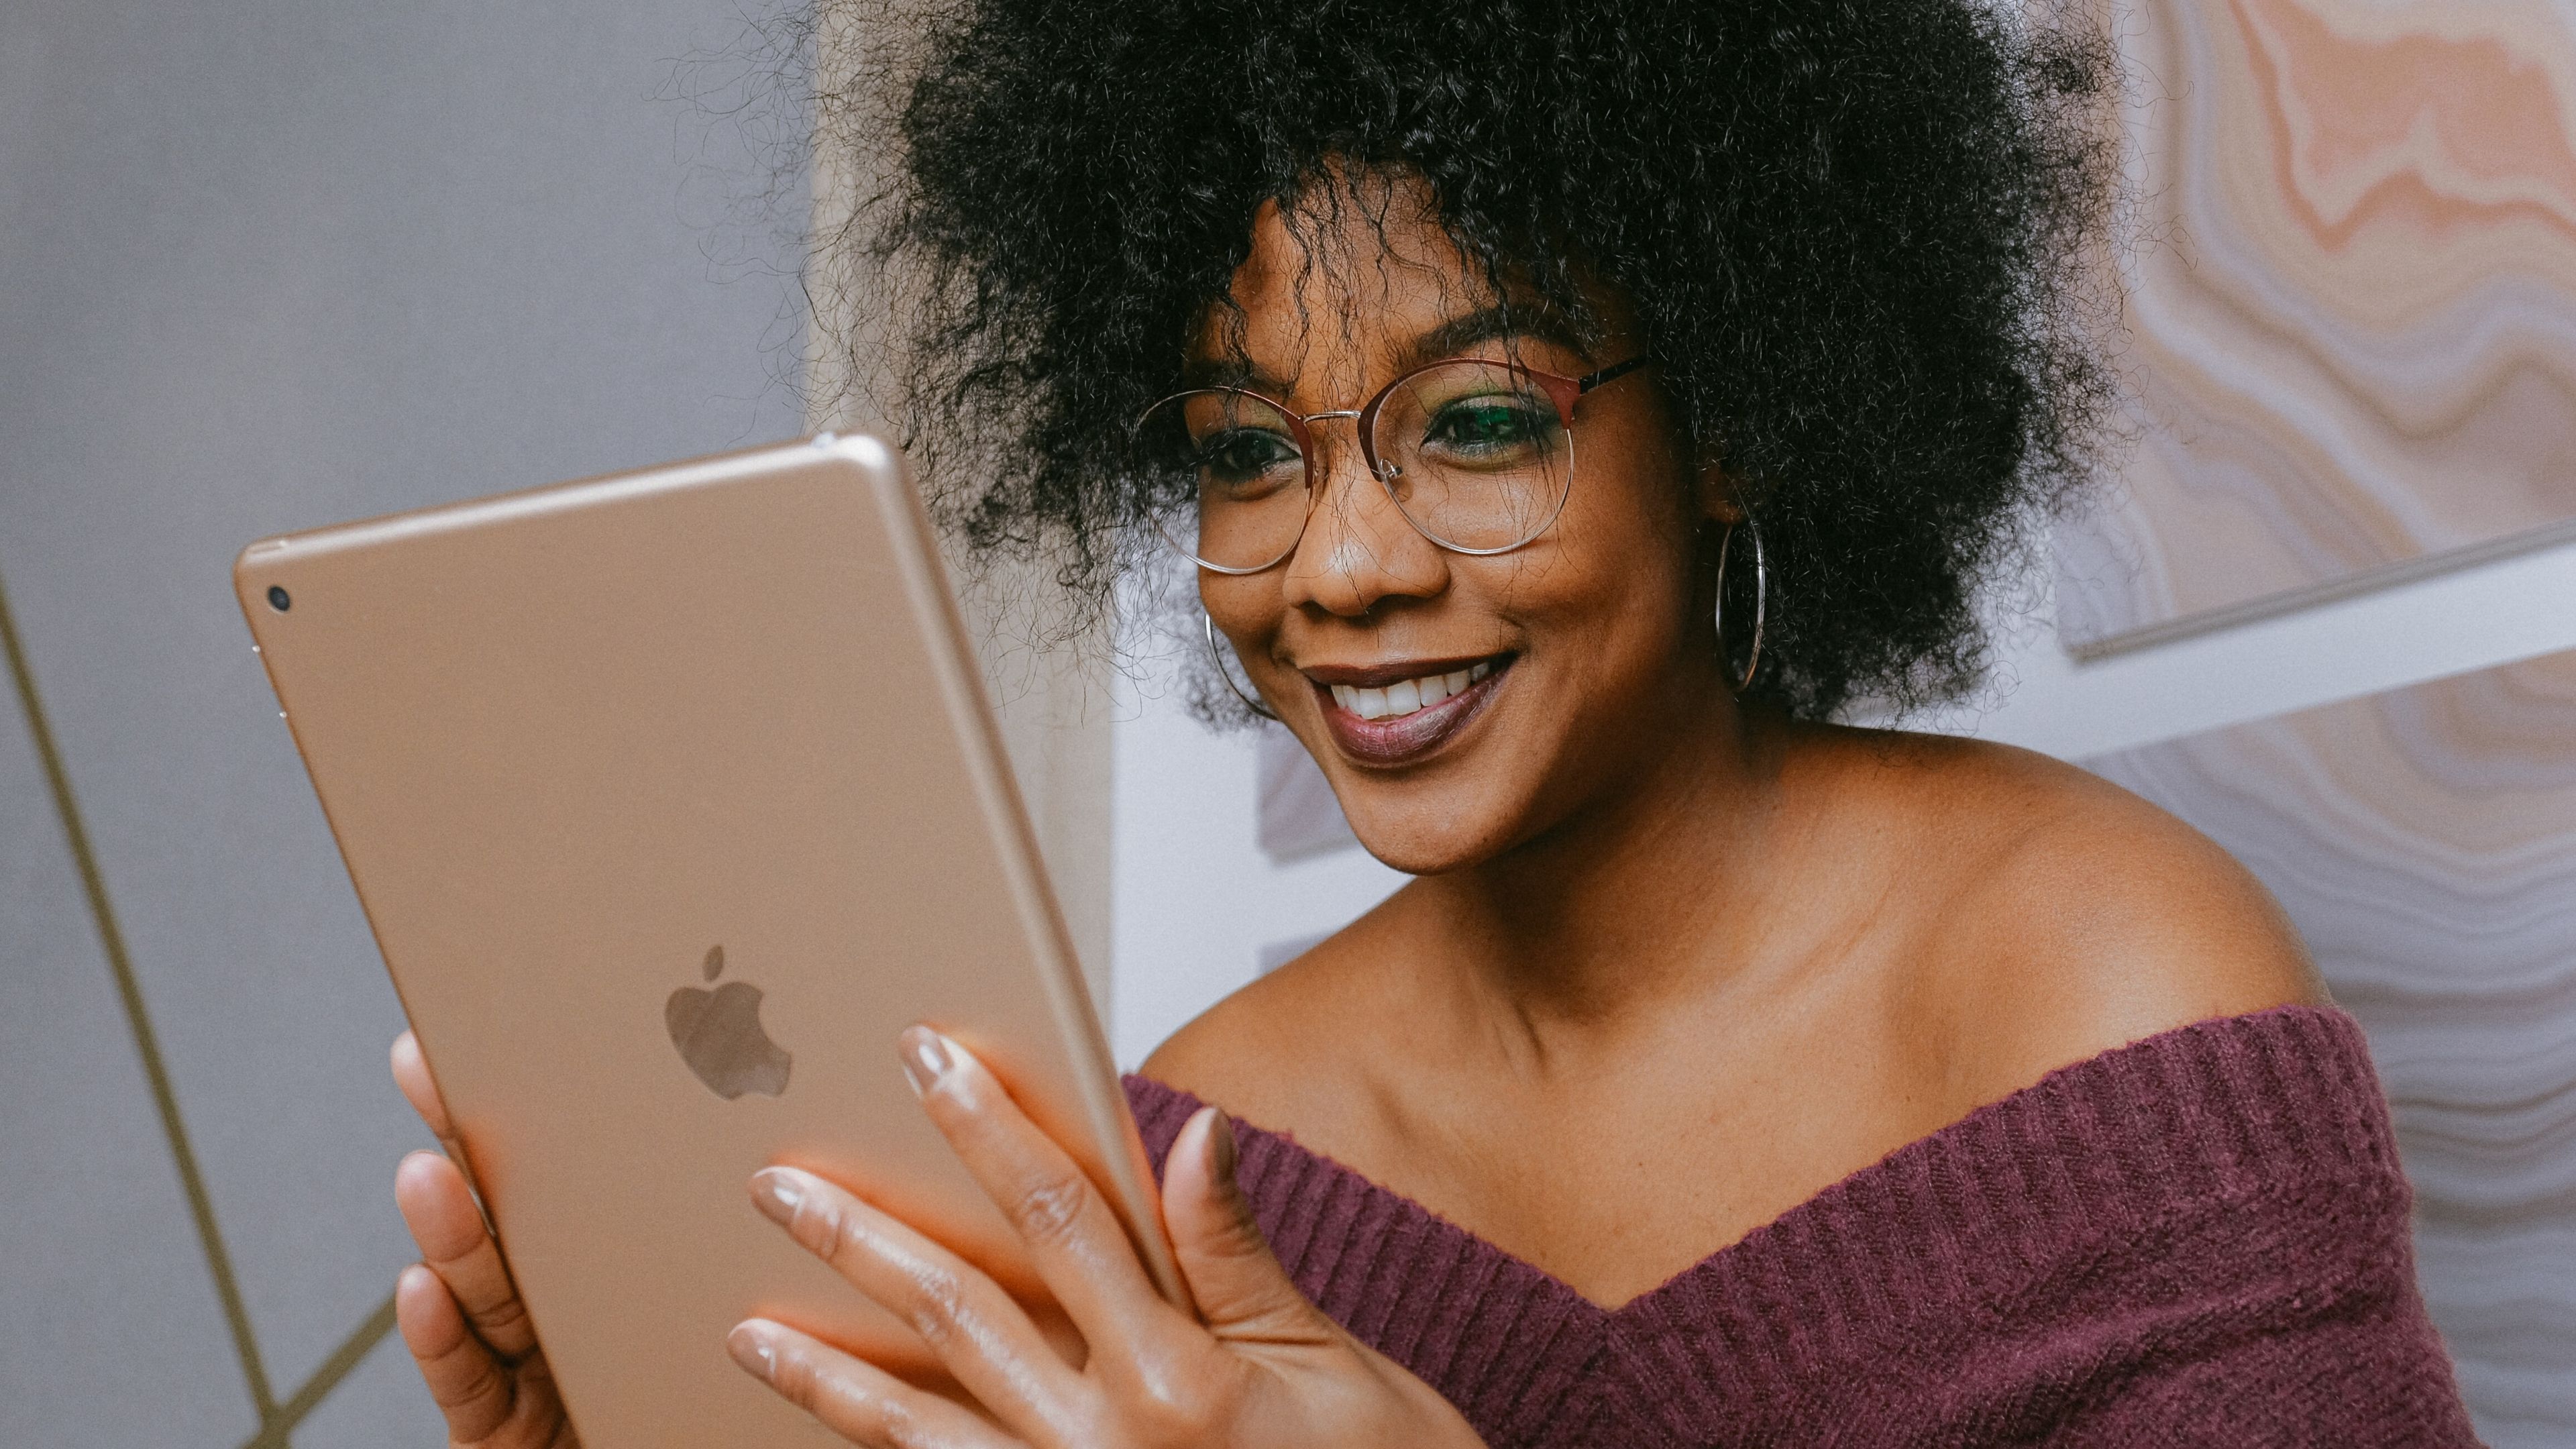 Woman smiling and working on an iPad